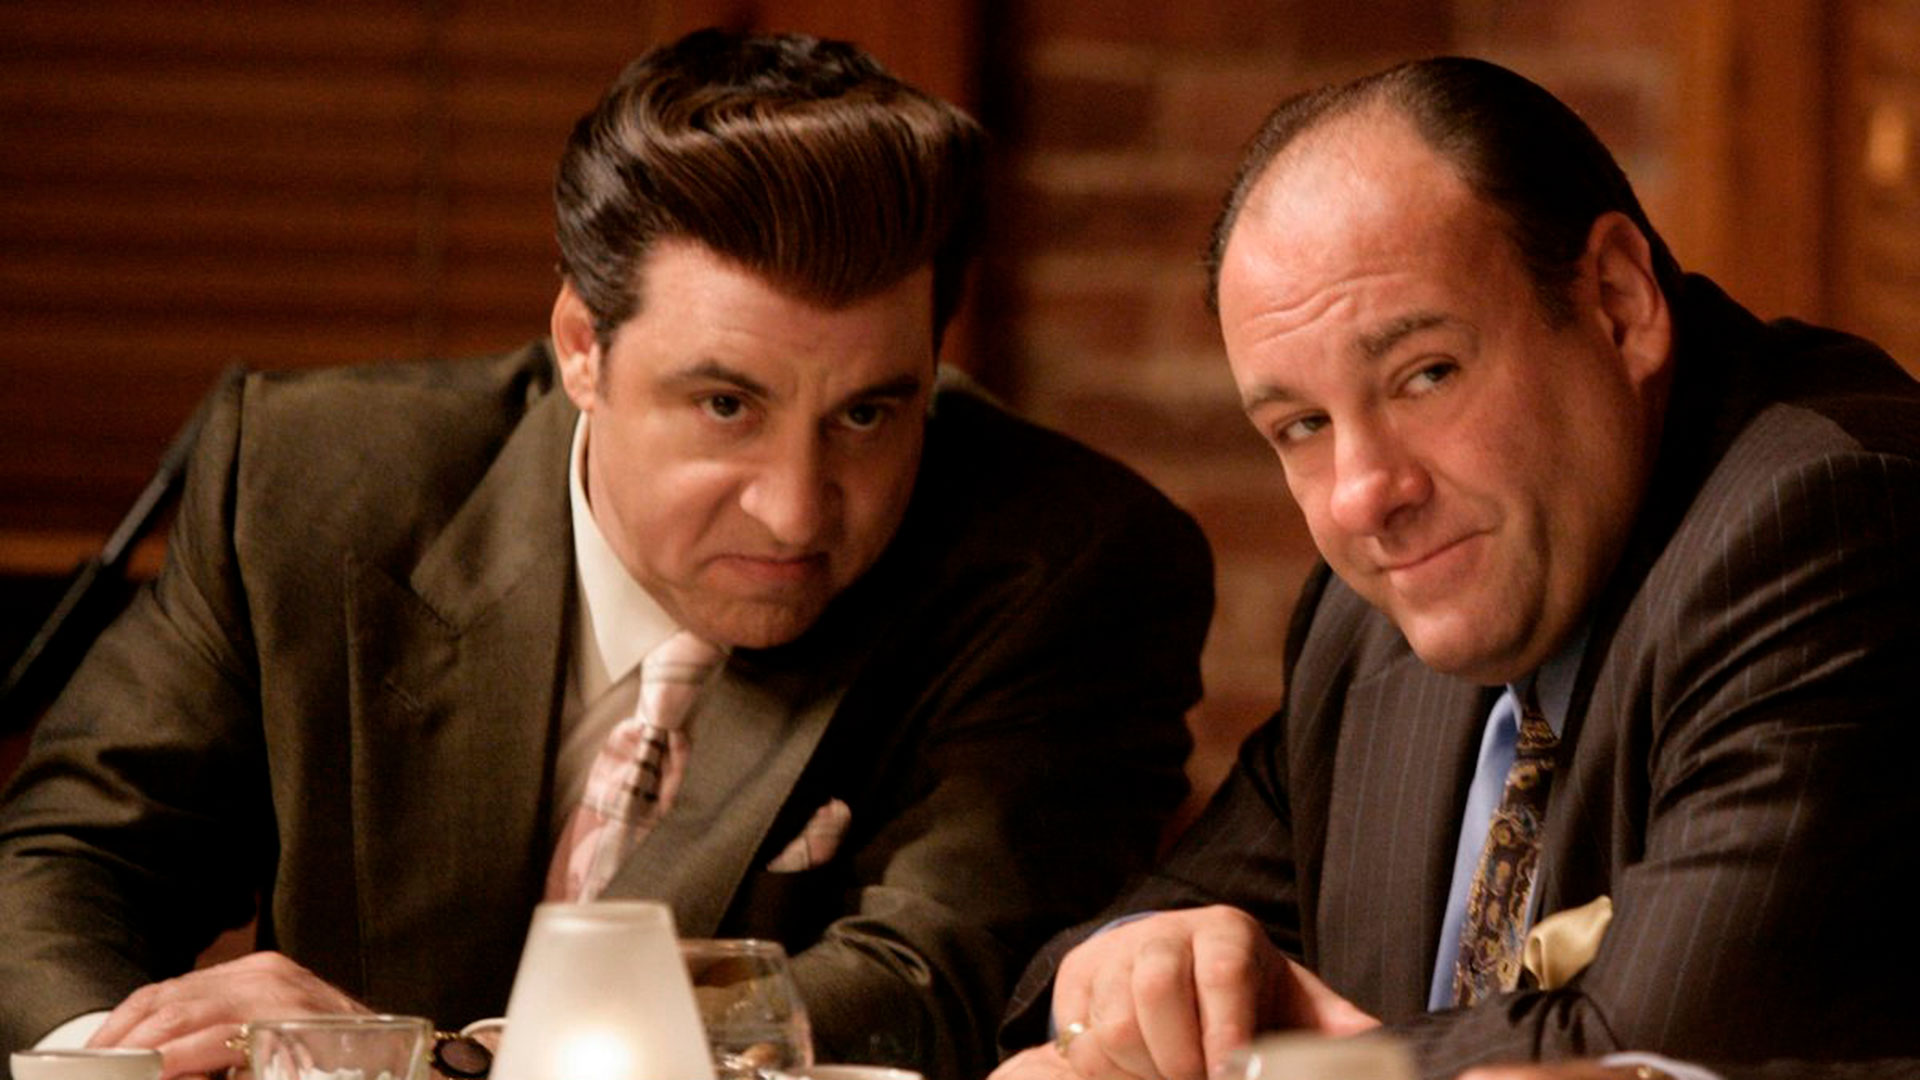 Steve Van Zandt and James Gandaolfini in "The Sopranos", a masterpiece of the series of our time (Photo: Max press)